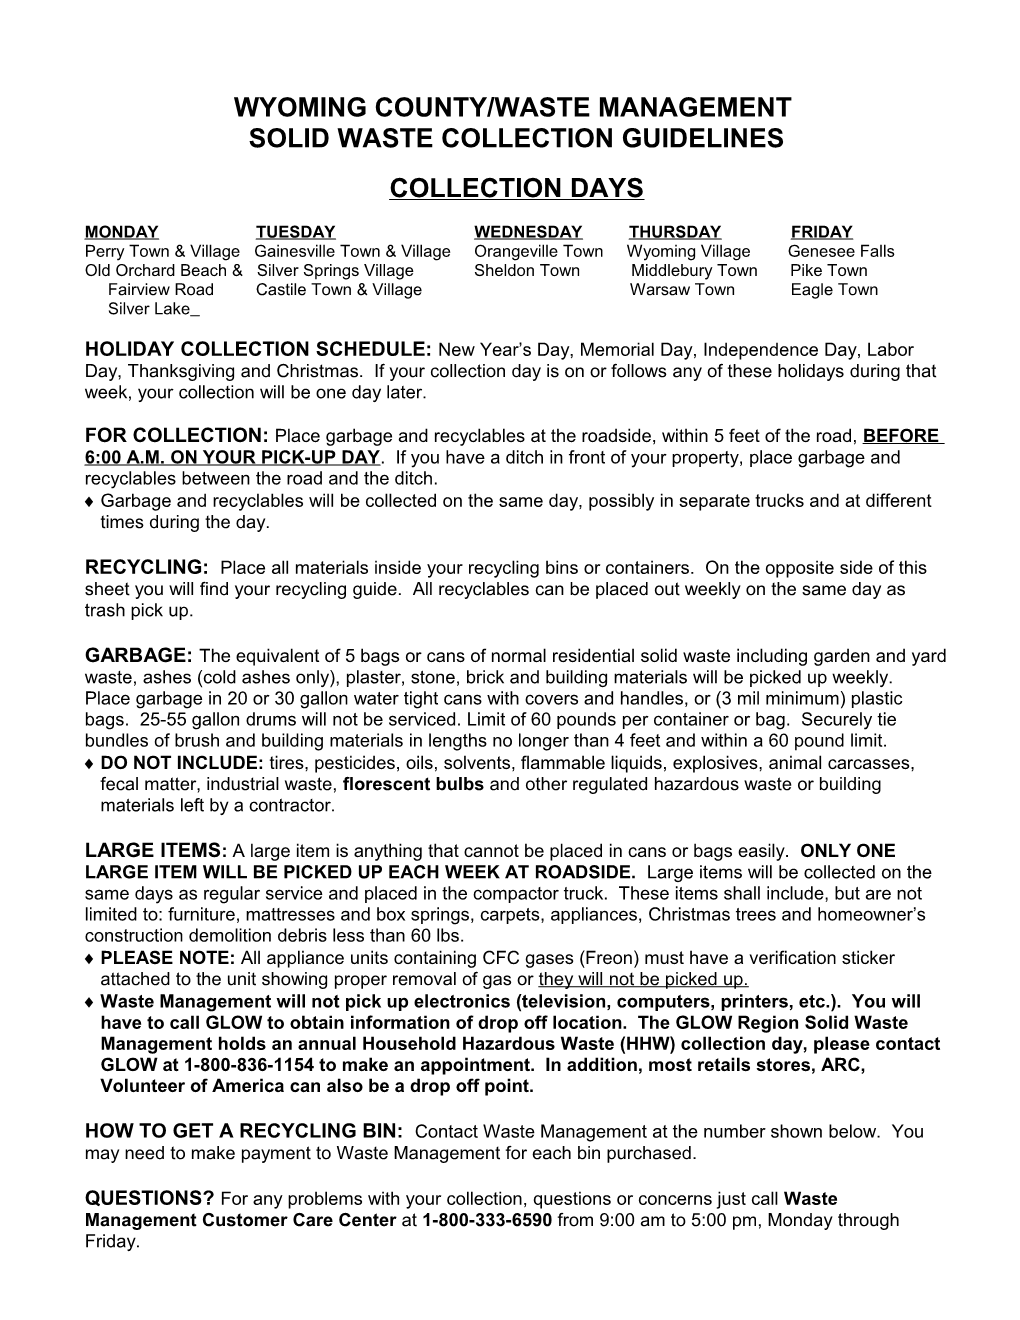 Wyoming County/Nu Way Solid Waste Collection